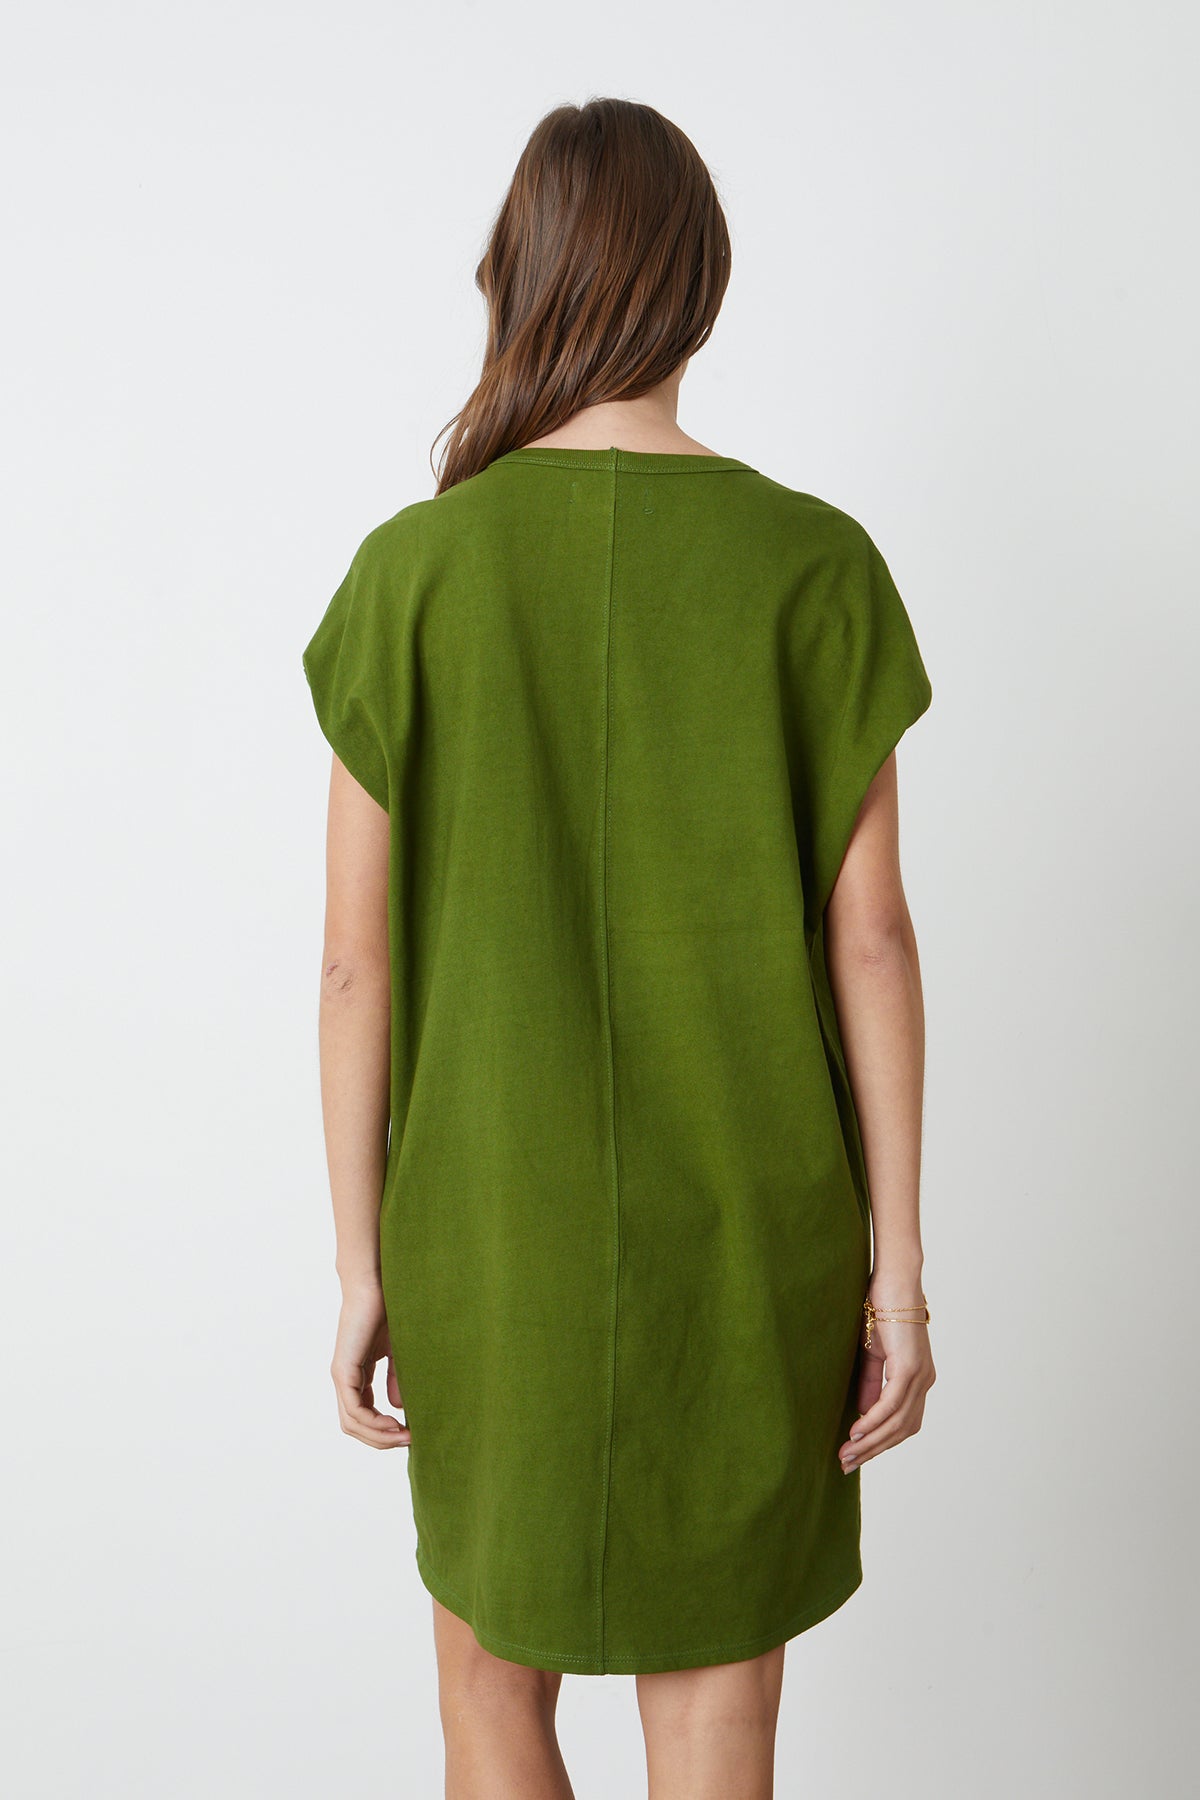 The back view of a woman wearing a green Velvet by Graham & Spencer Cassidy Crew Neck Dress.-26342692716737